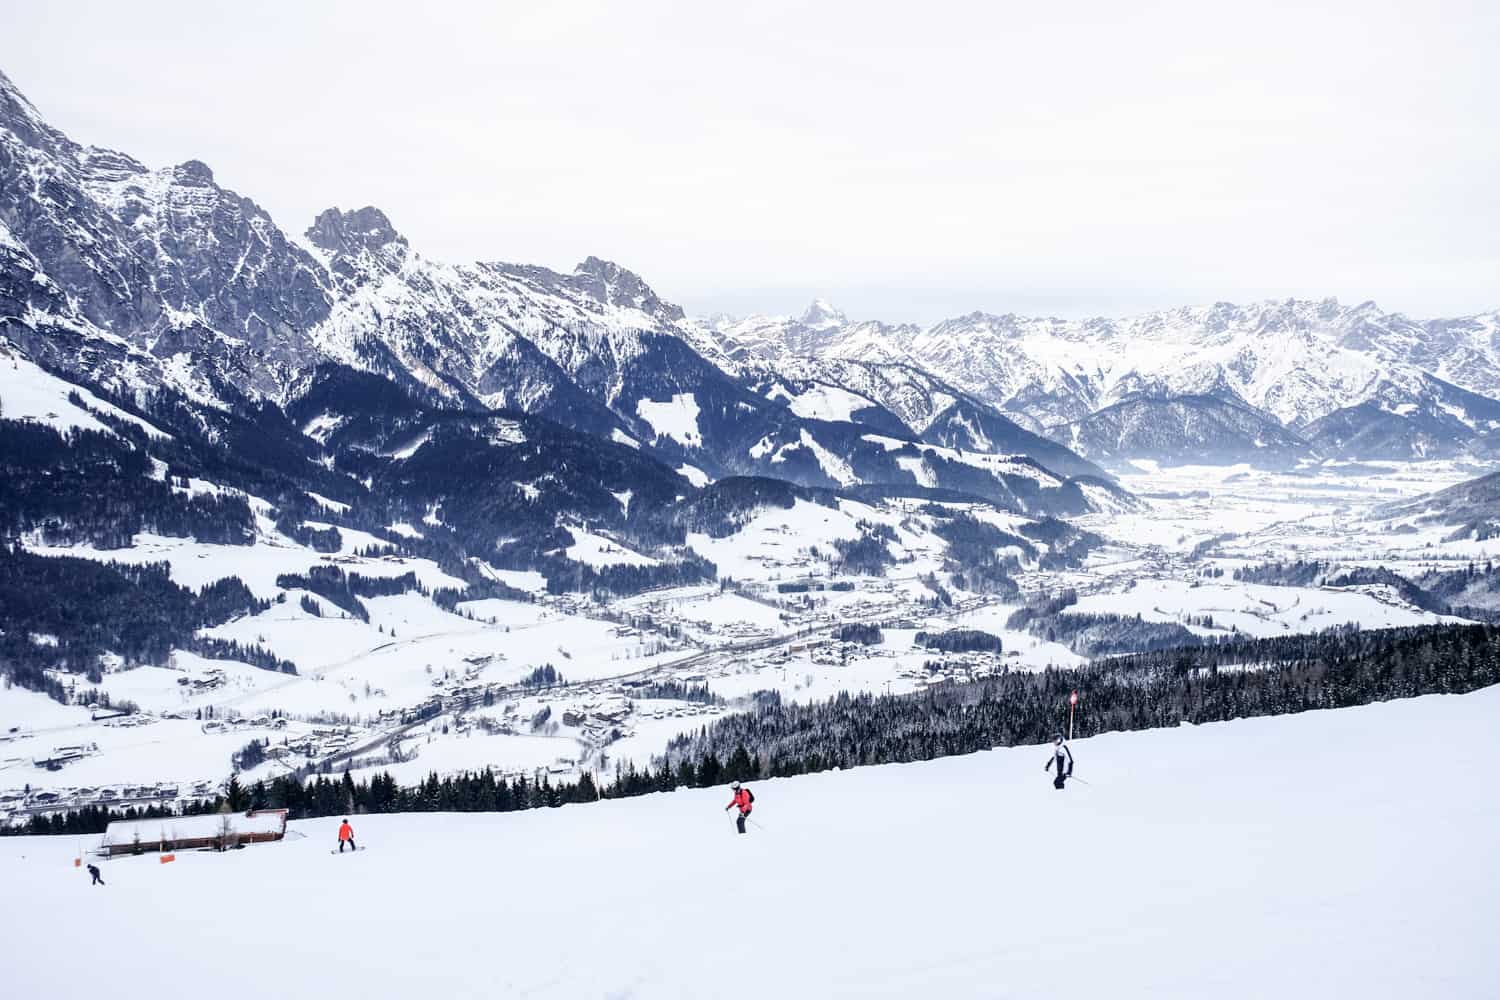 Four people skiing on the wide ski slopes of the Skicircus resort in Salzburg